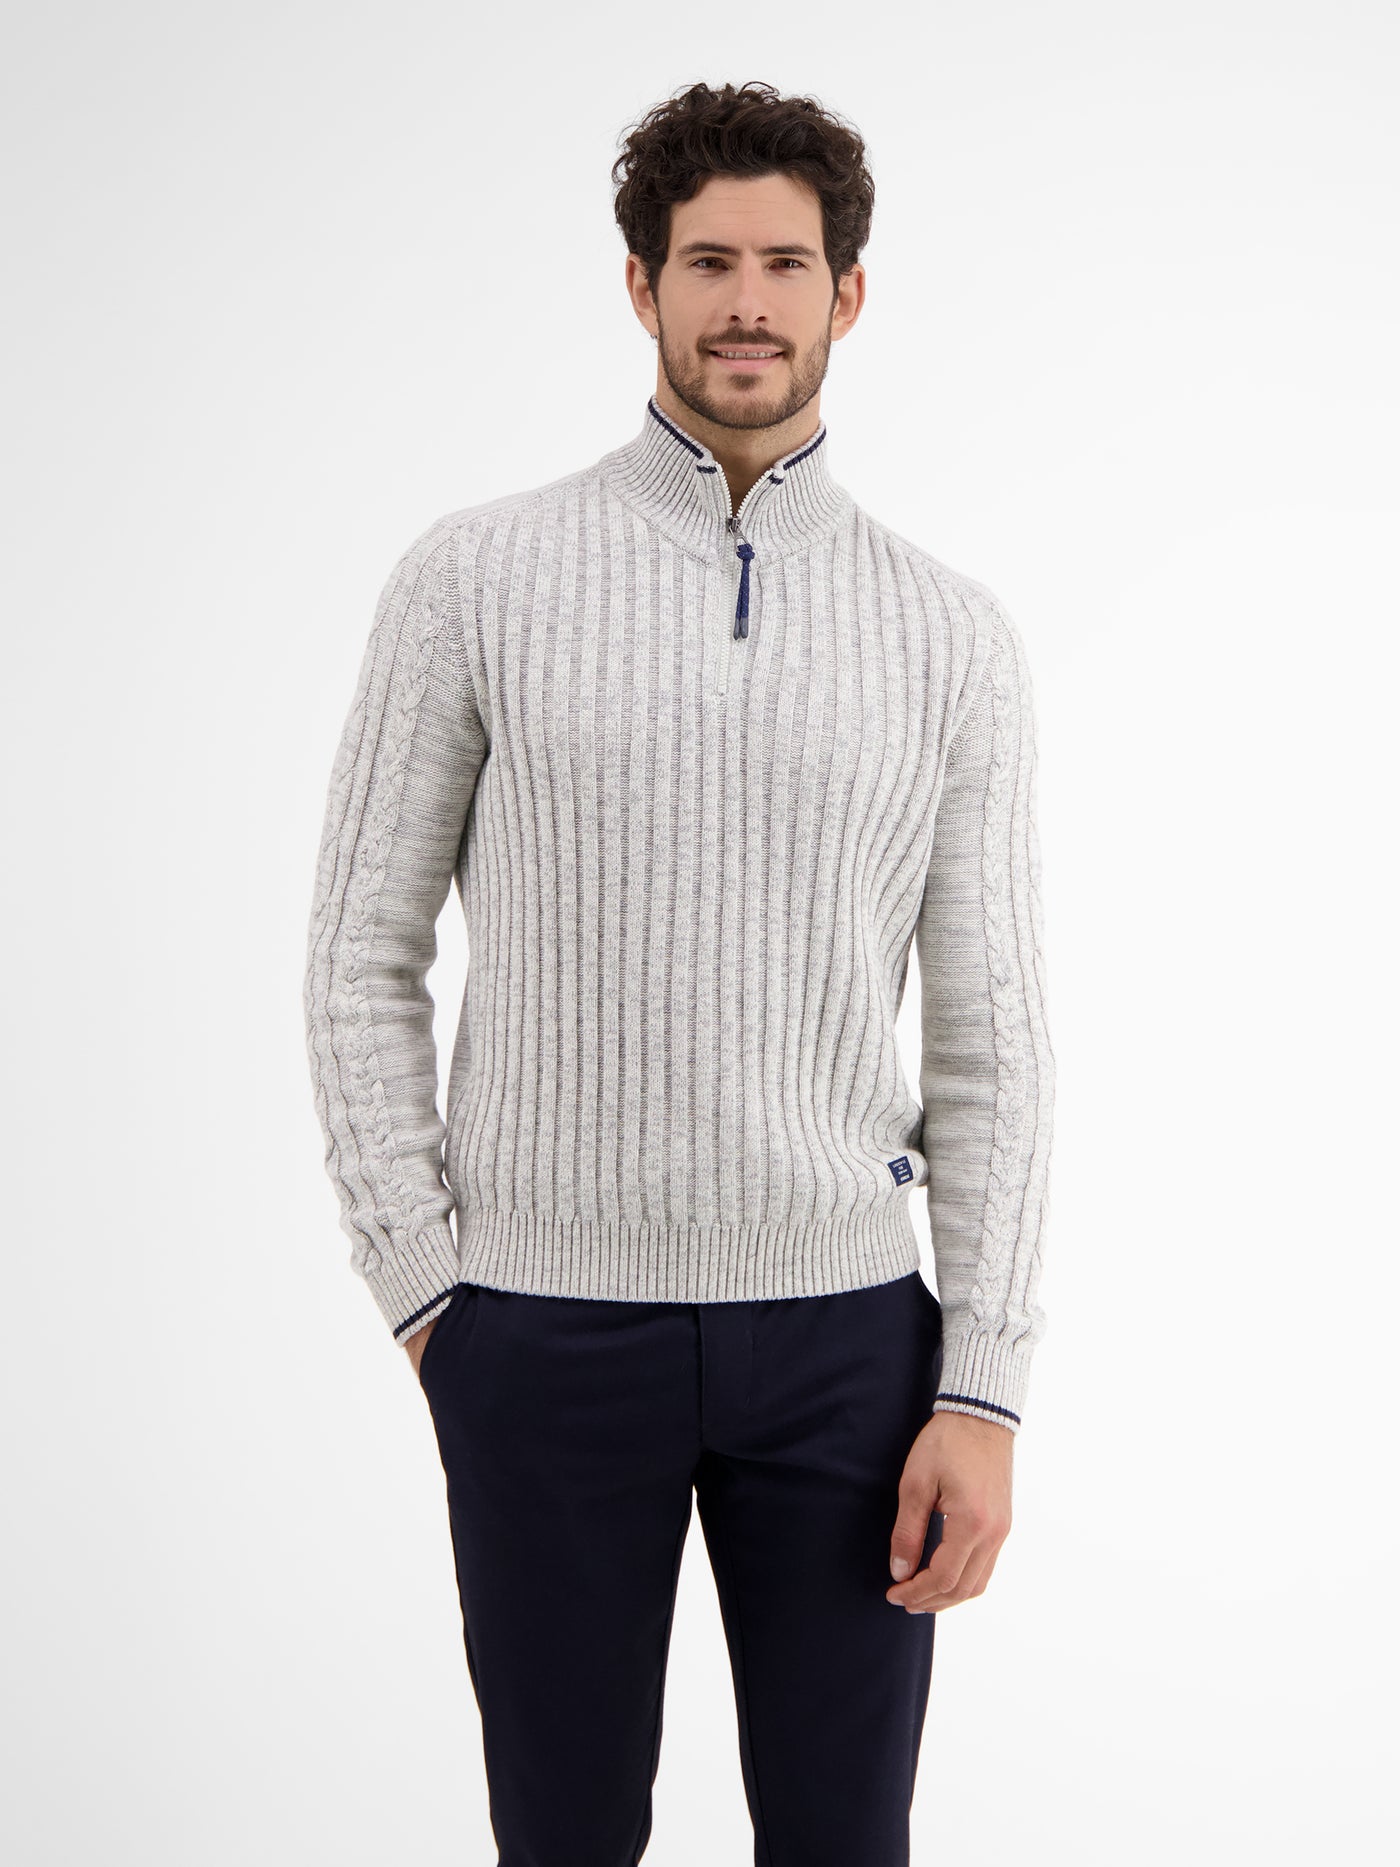 Knit sweater, wide ribbed with stand-up collar